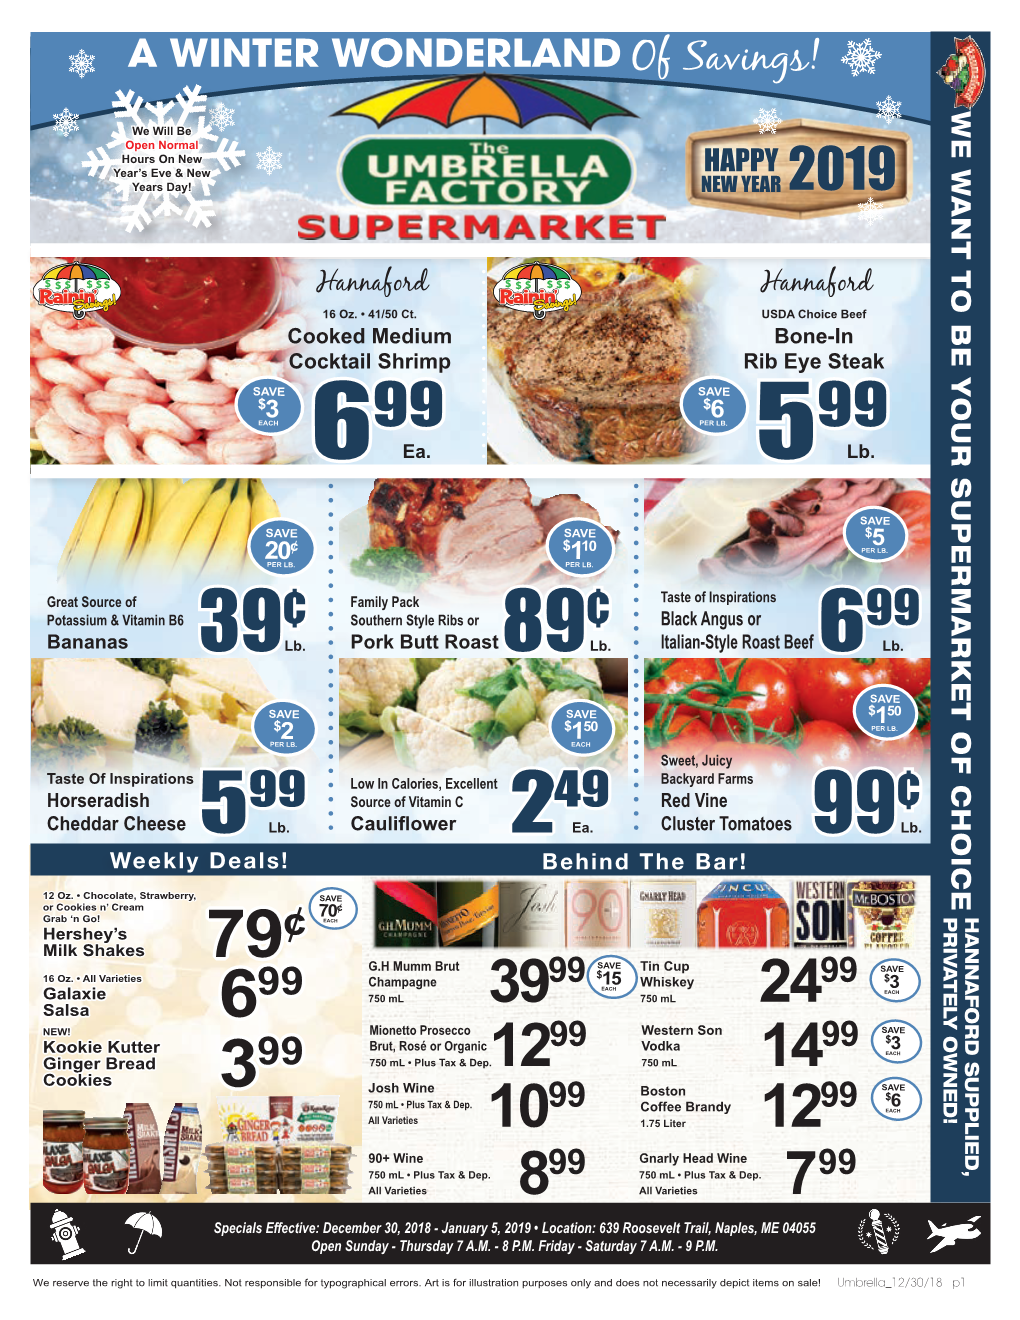 A WINTER WONDERLAND of Savings! WE WANT to BE YOUR SUPERMARKET of CHOICE